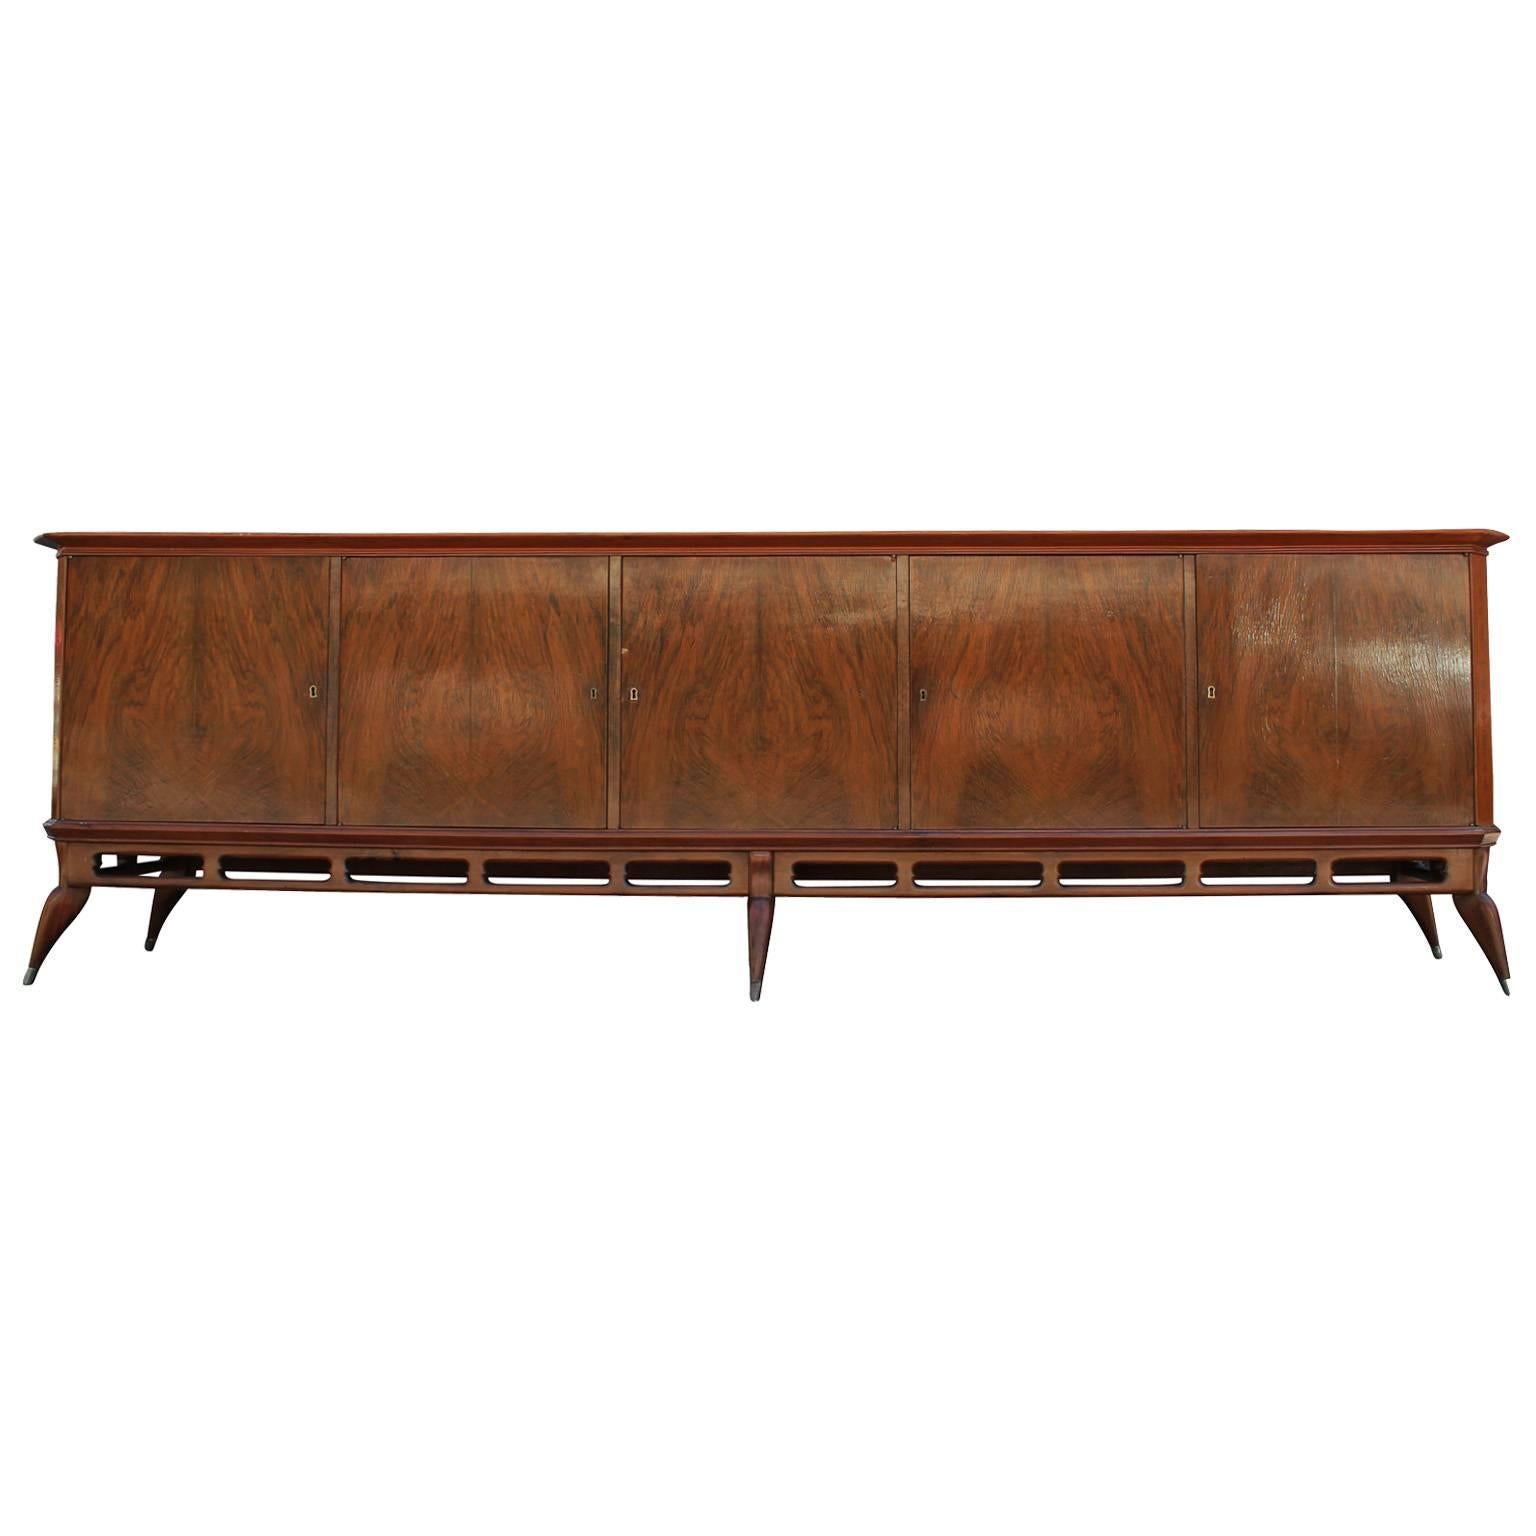 Large Modern Argentinian Mahogany Sideboard Credenza with Mirrored Bar Storage